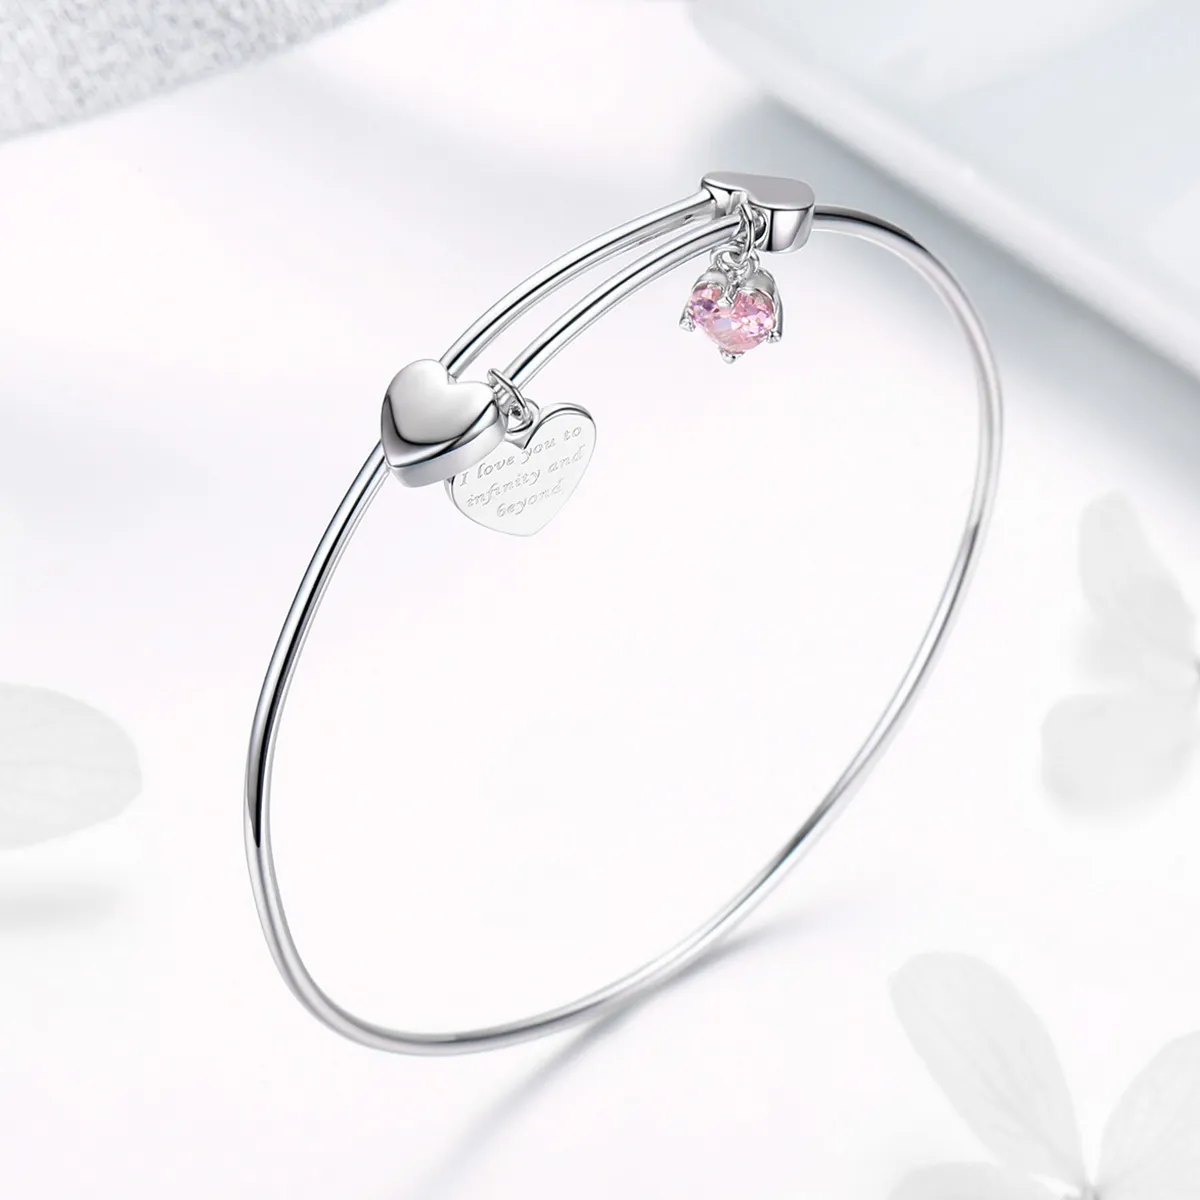 Pandora Style Silver Love Promise Charm Entwined Slider Bangle - SCB124